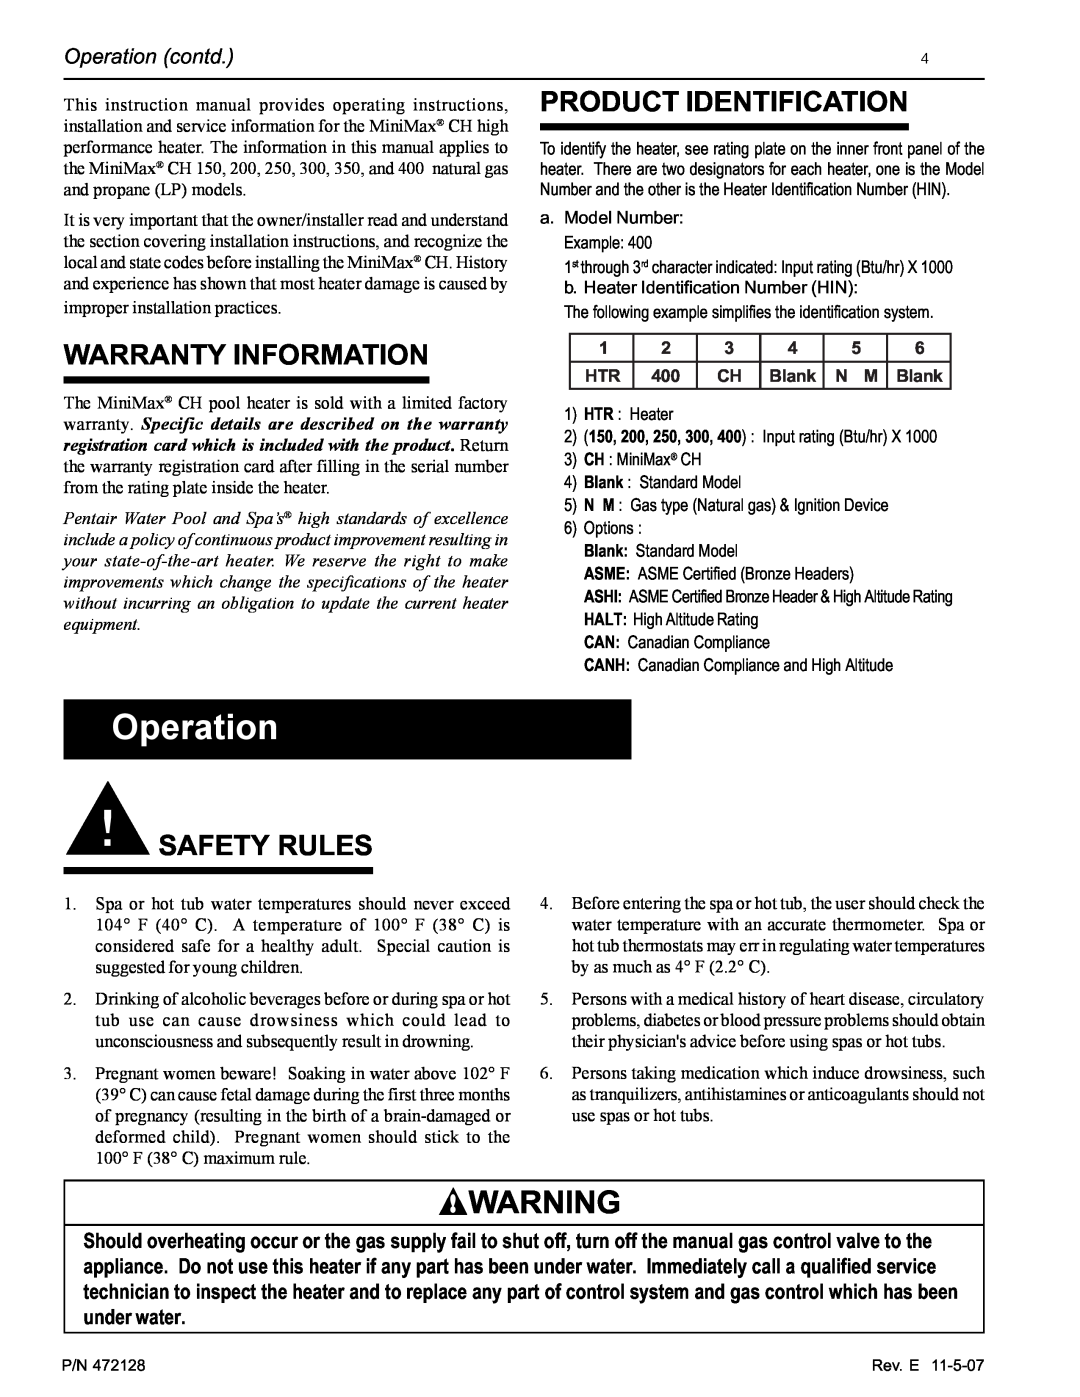 Pentair Hot Tub manual Warranty Information, Product Identification, Safety Rules, Operation contd 